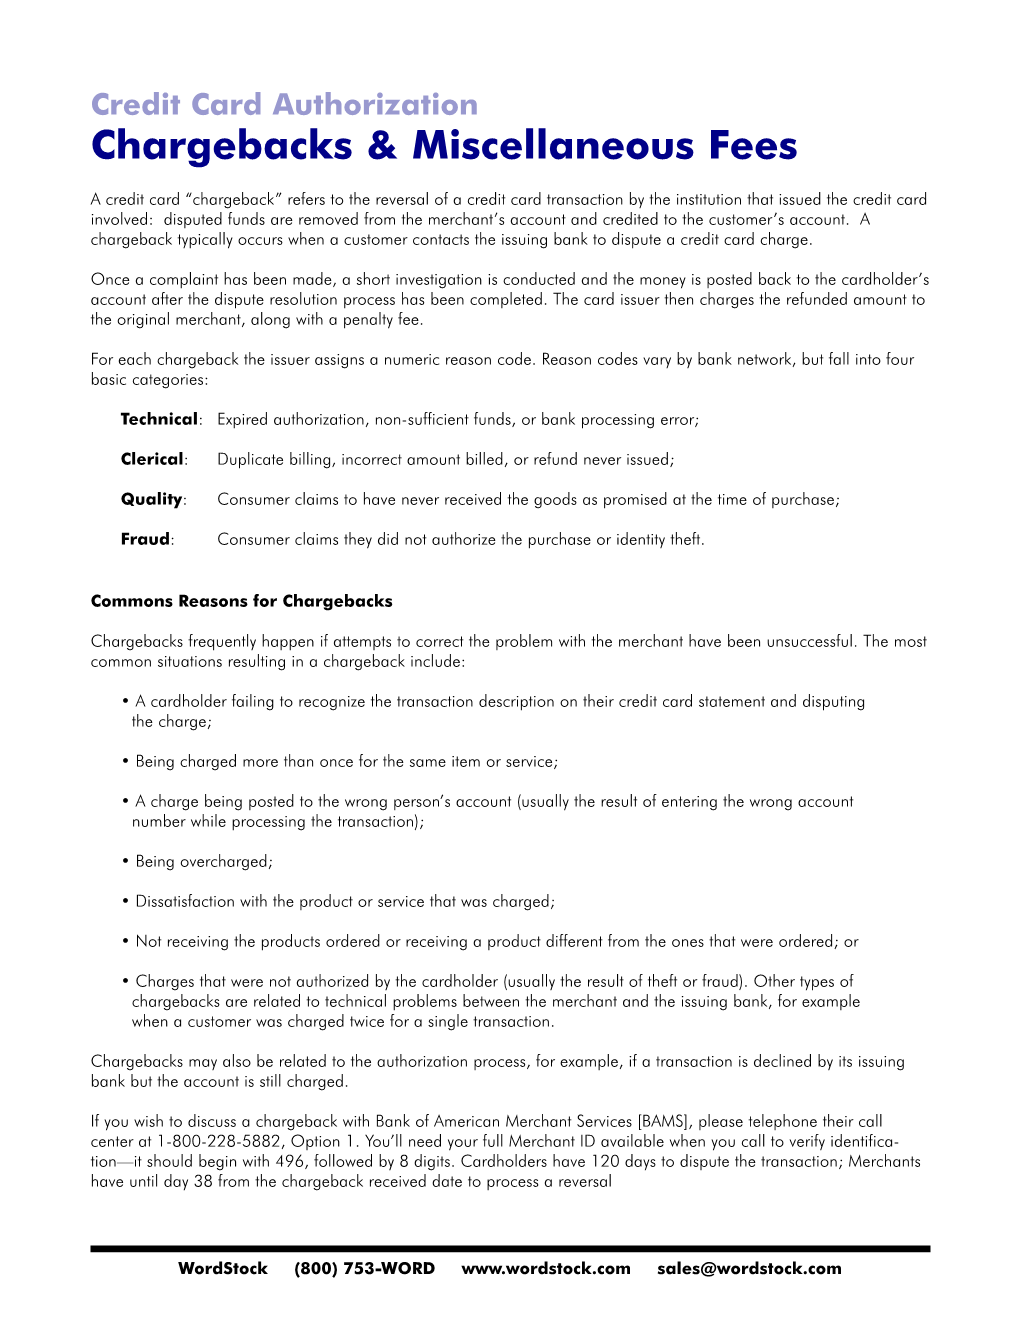 Chargebacks & Miscellaneous Fees